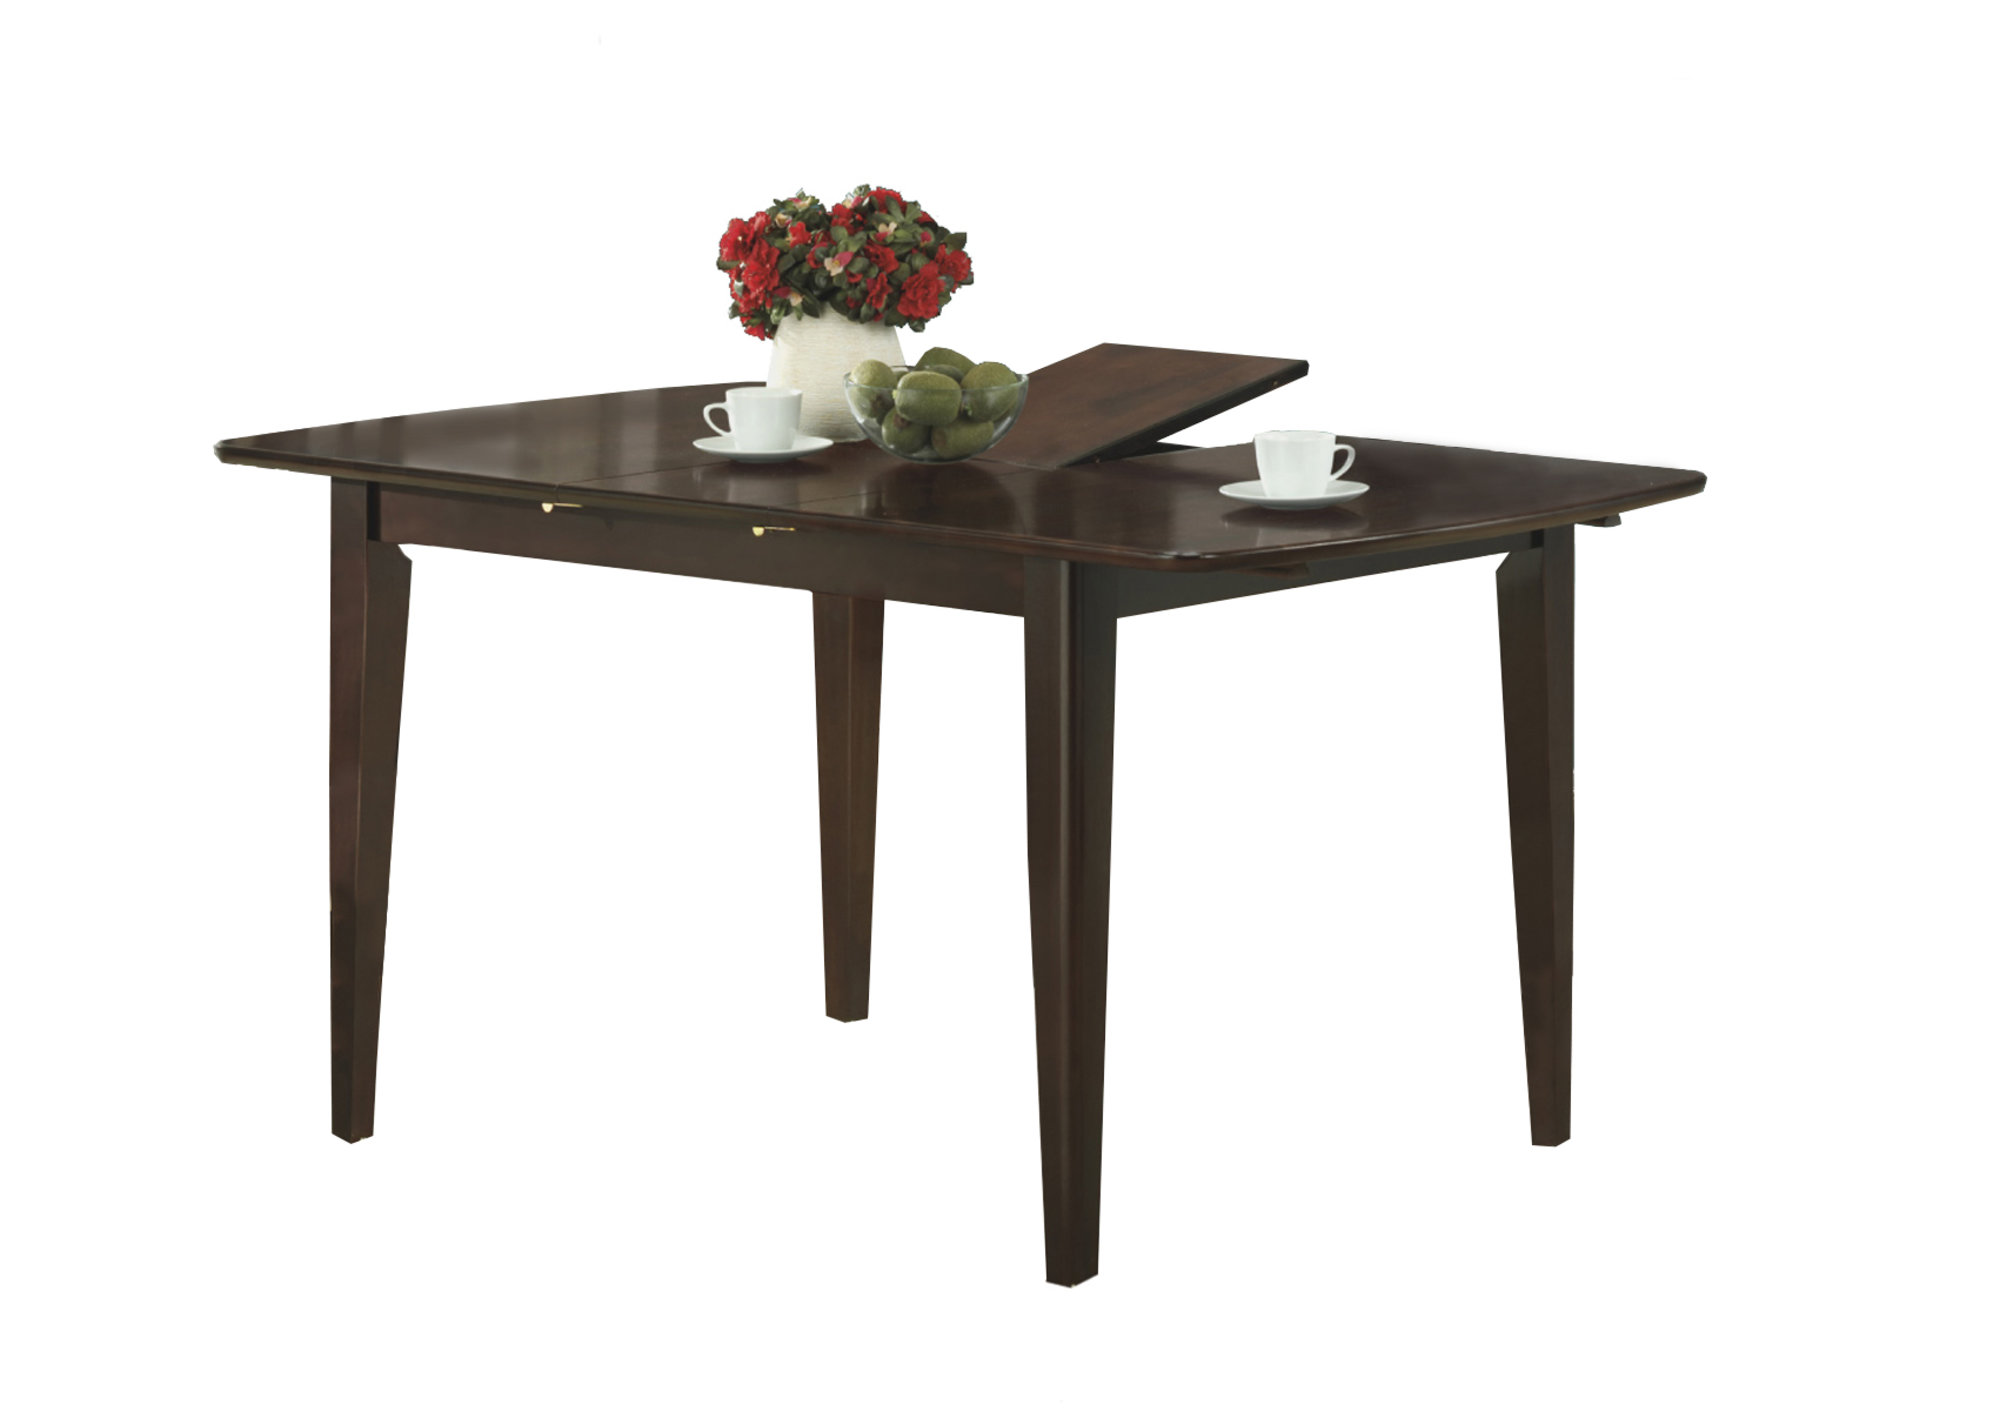 35.5" x 60" x 30" Cappuccino Solid Wood Dining Table With A Leaf